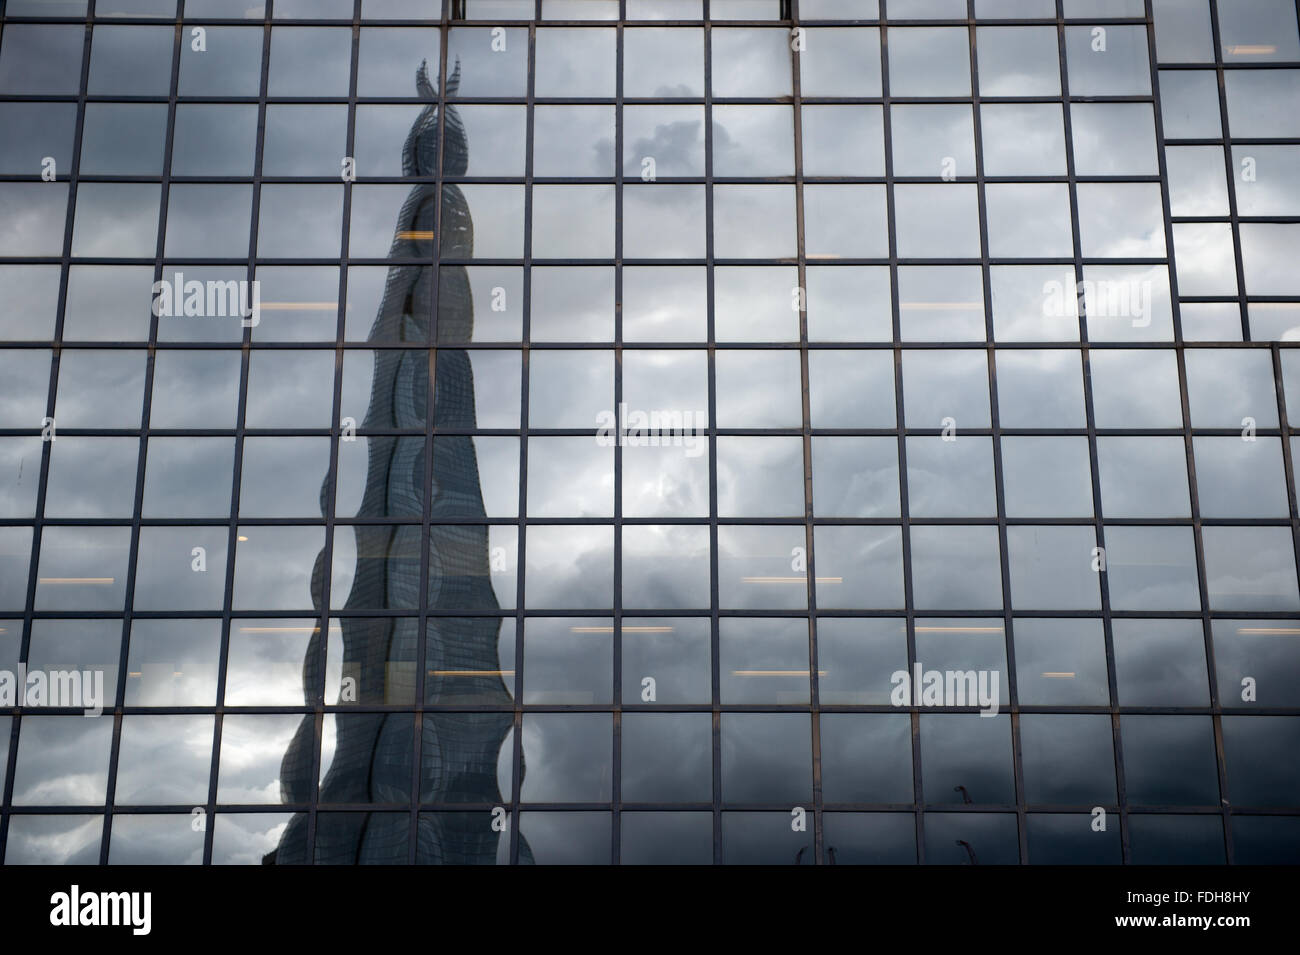 Reflection of The Shard skyscraper on a glass building in London, England. Stock Photo